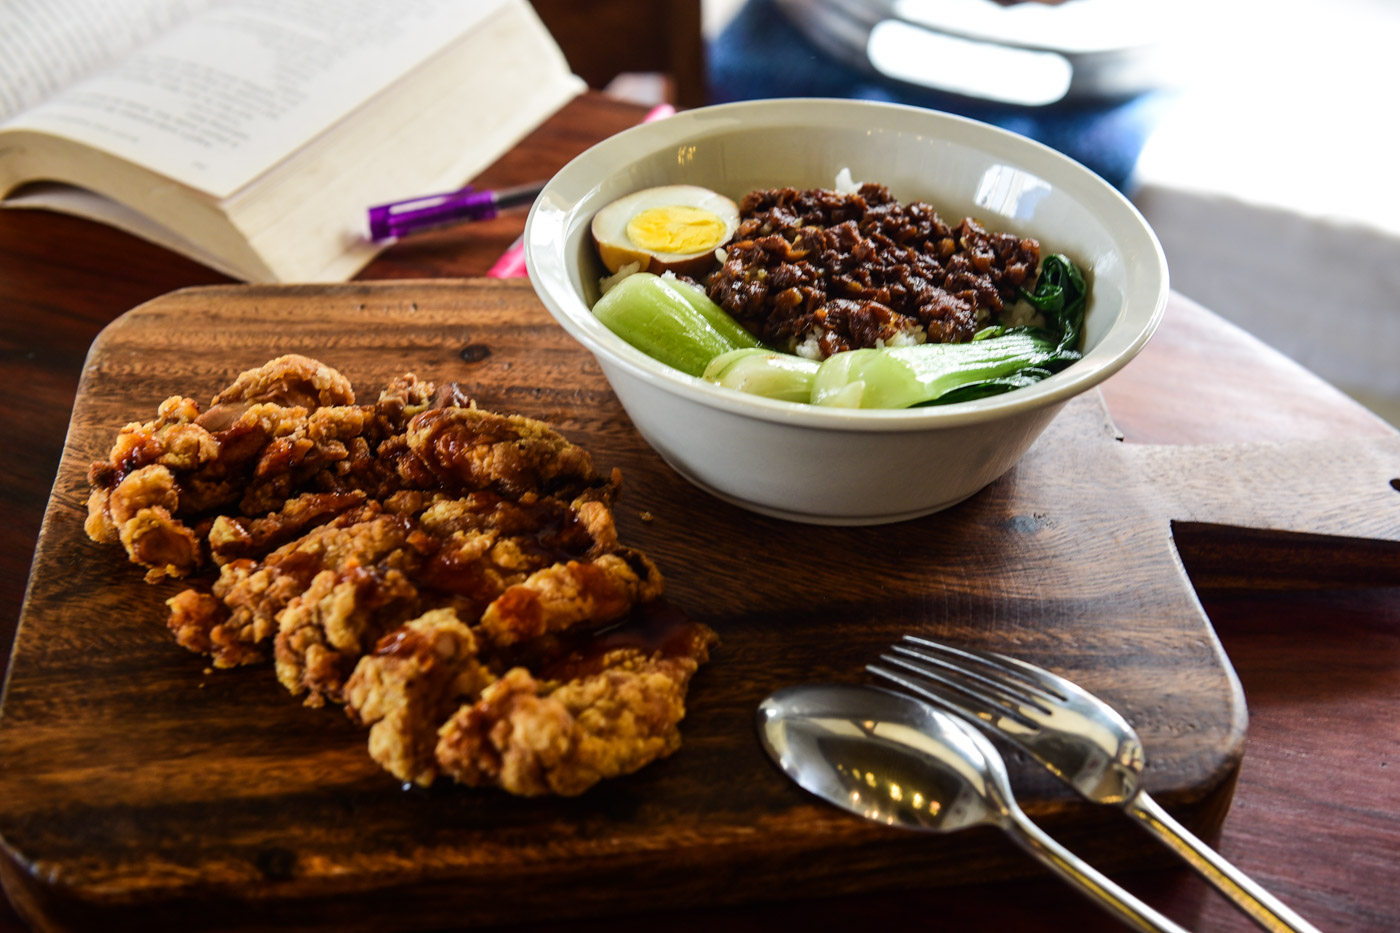 TAIWANESE FRIED CHICKEN. Served with Lu Rou Fan (rice with minced pork), this dish will fill you up real nice before you head home. Photo by Alecs Ongcal/ Rappler 